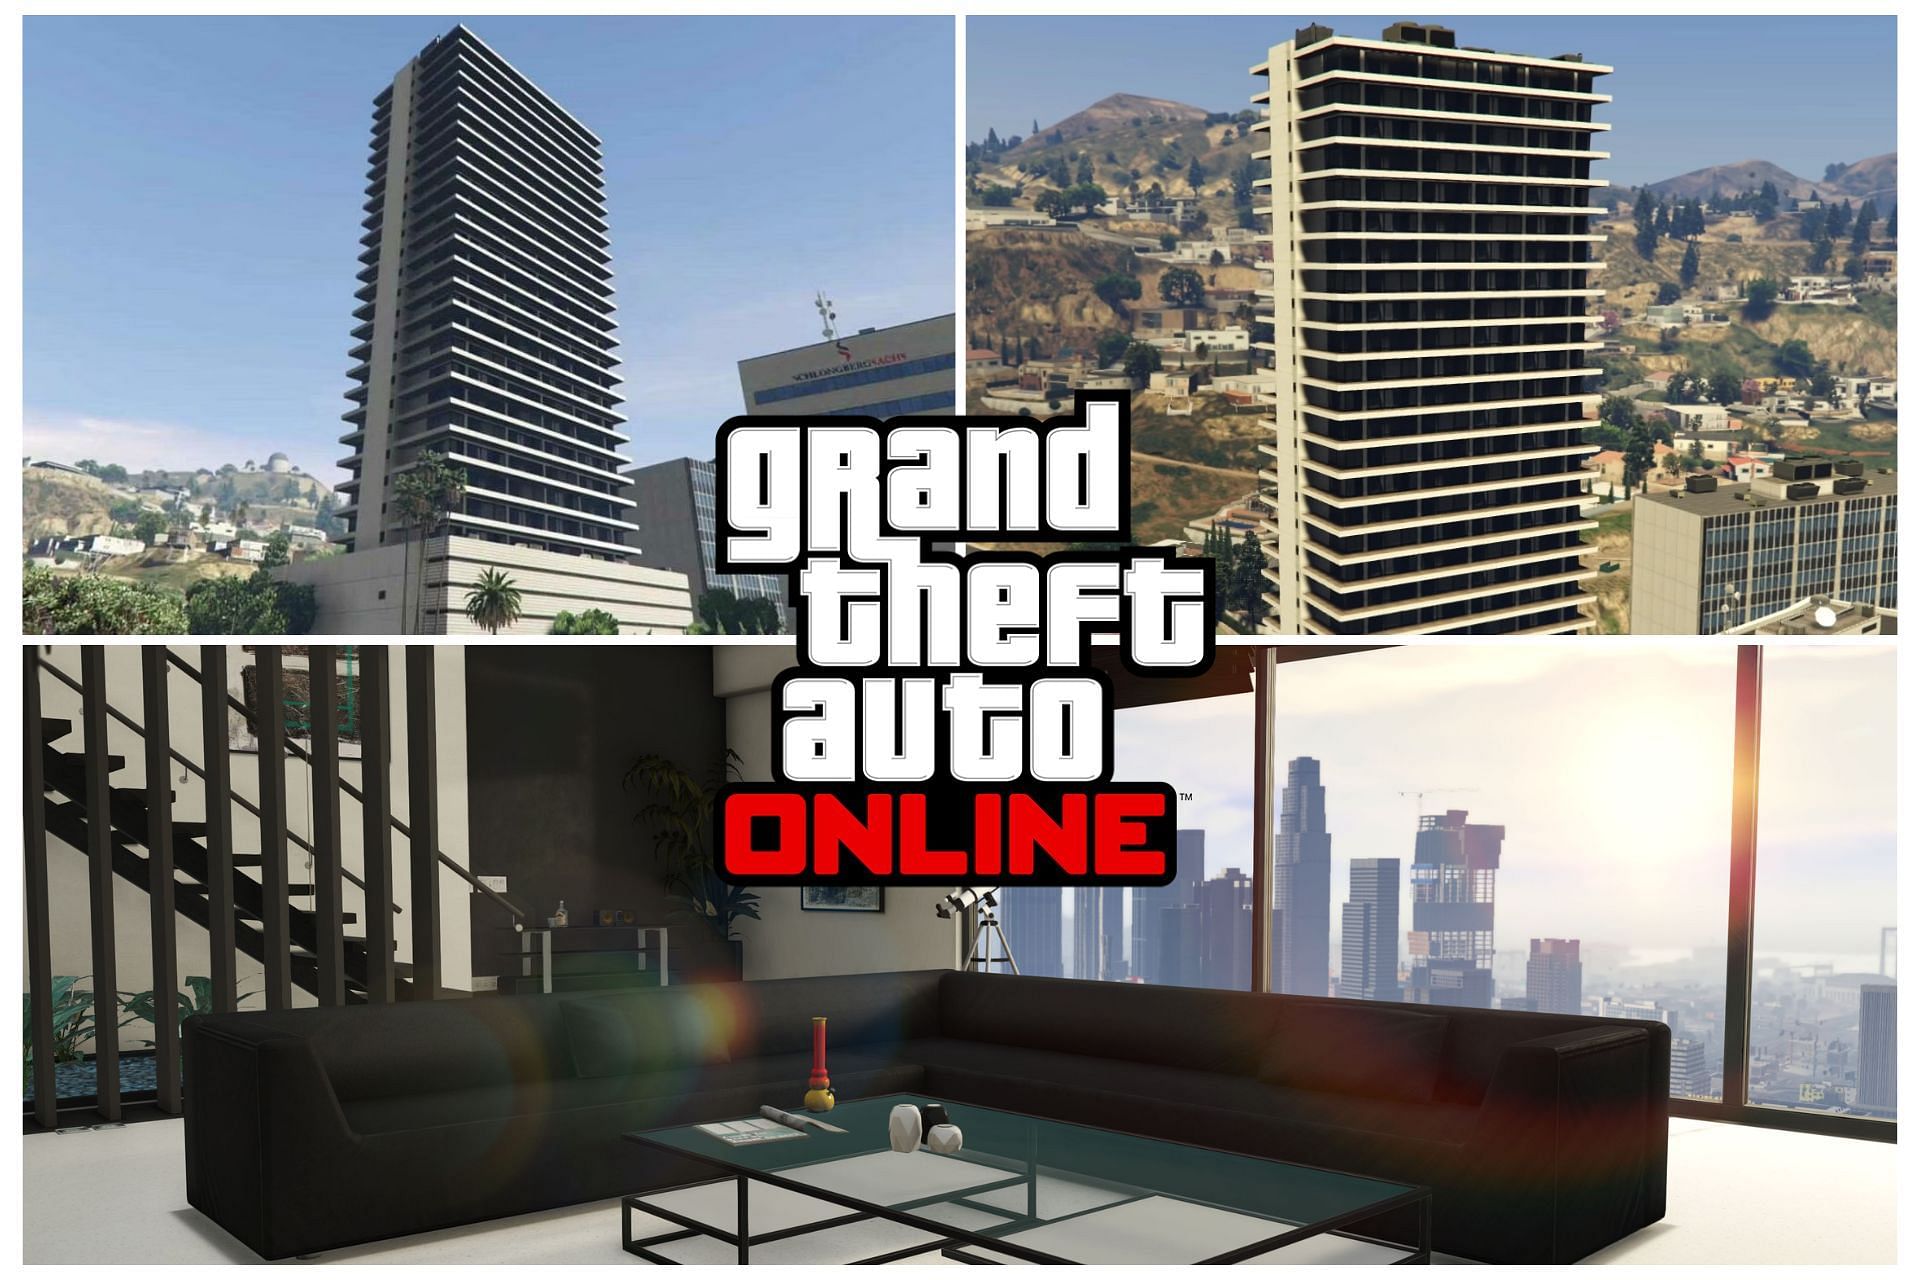 Apartments are important assets in GTA Online (Image via Rockstar Games)